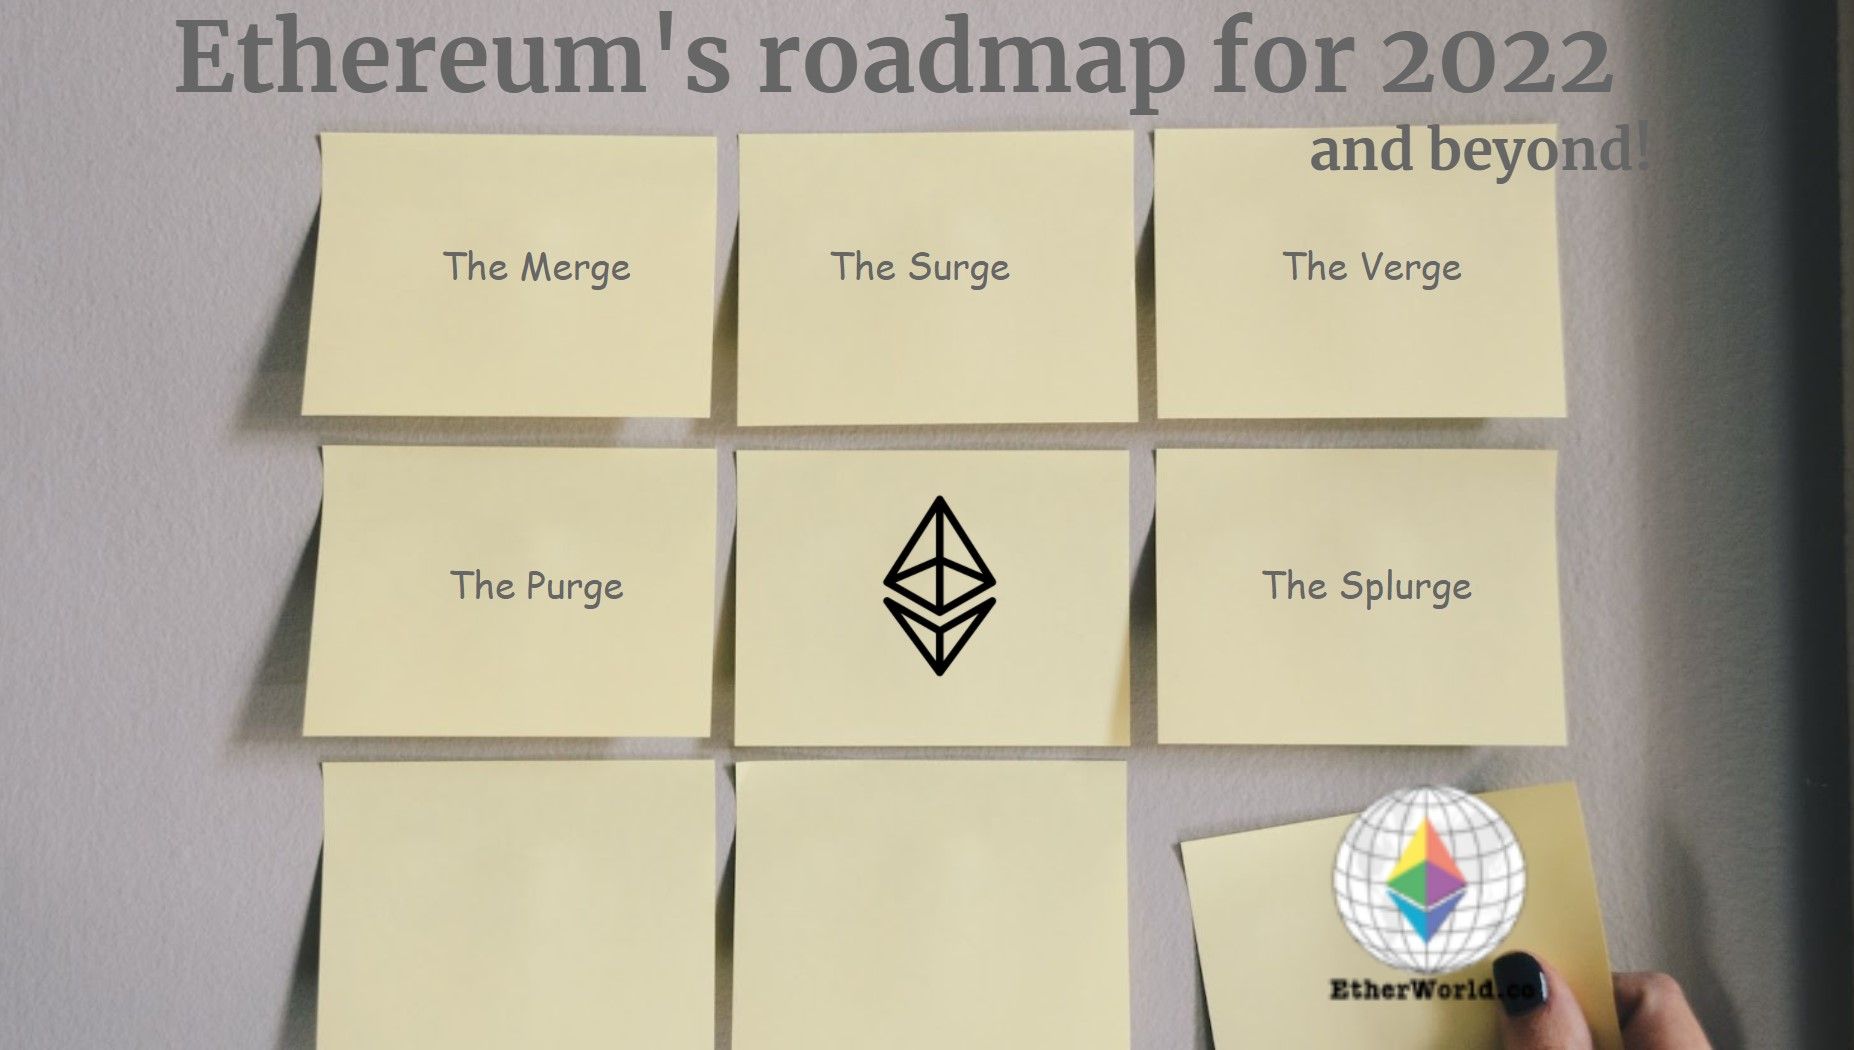 Ethereum's roadmap for 2022 and beyond!